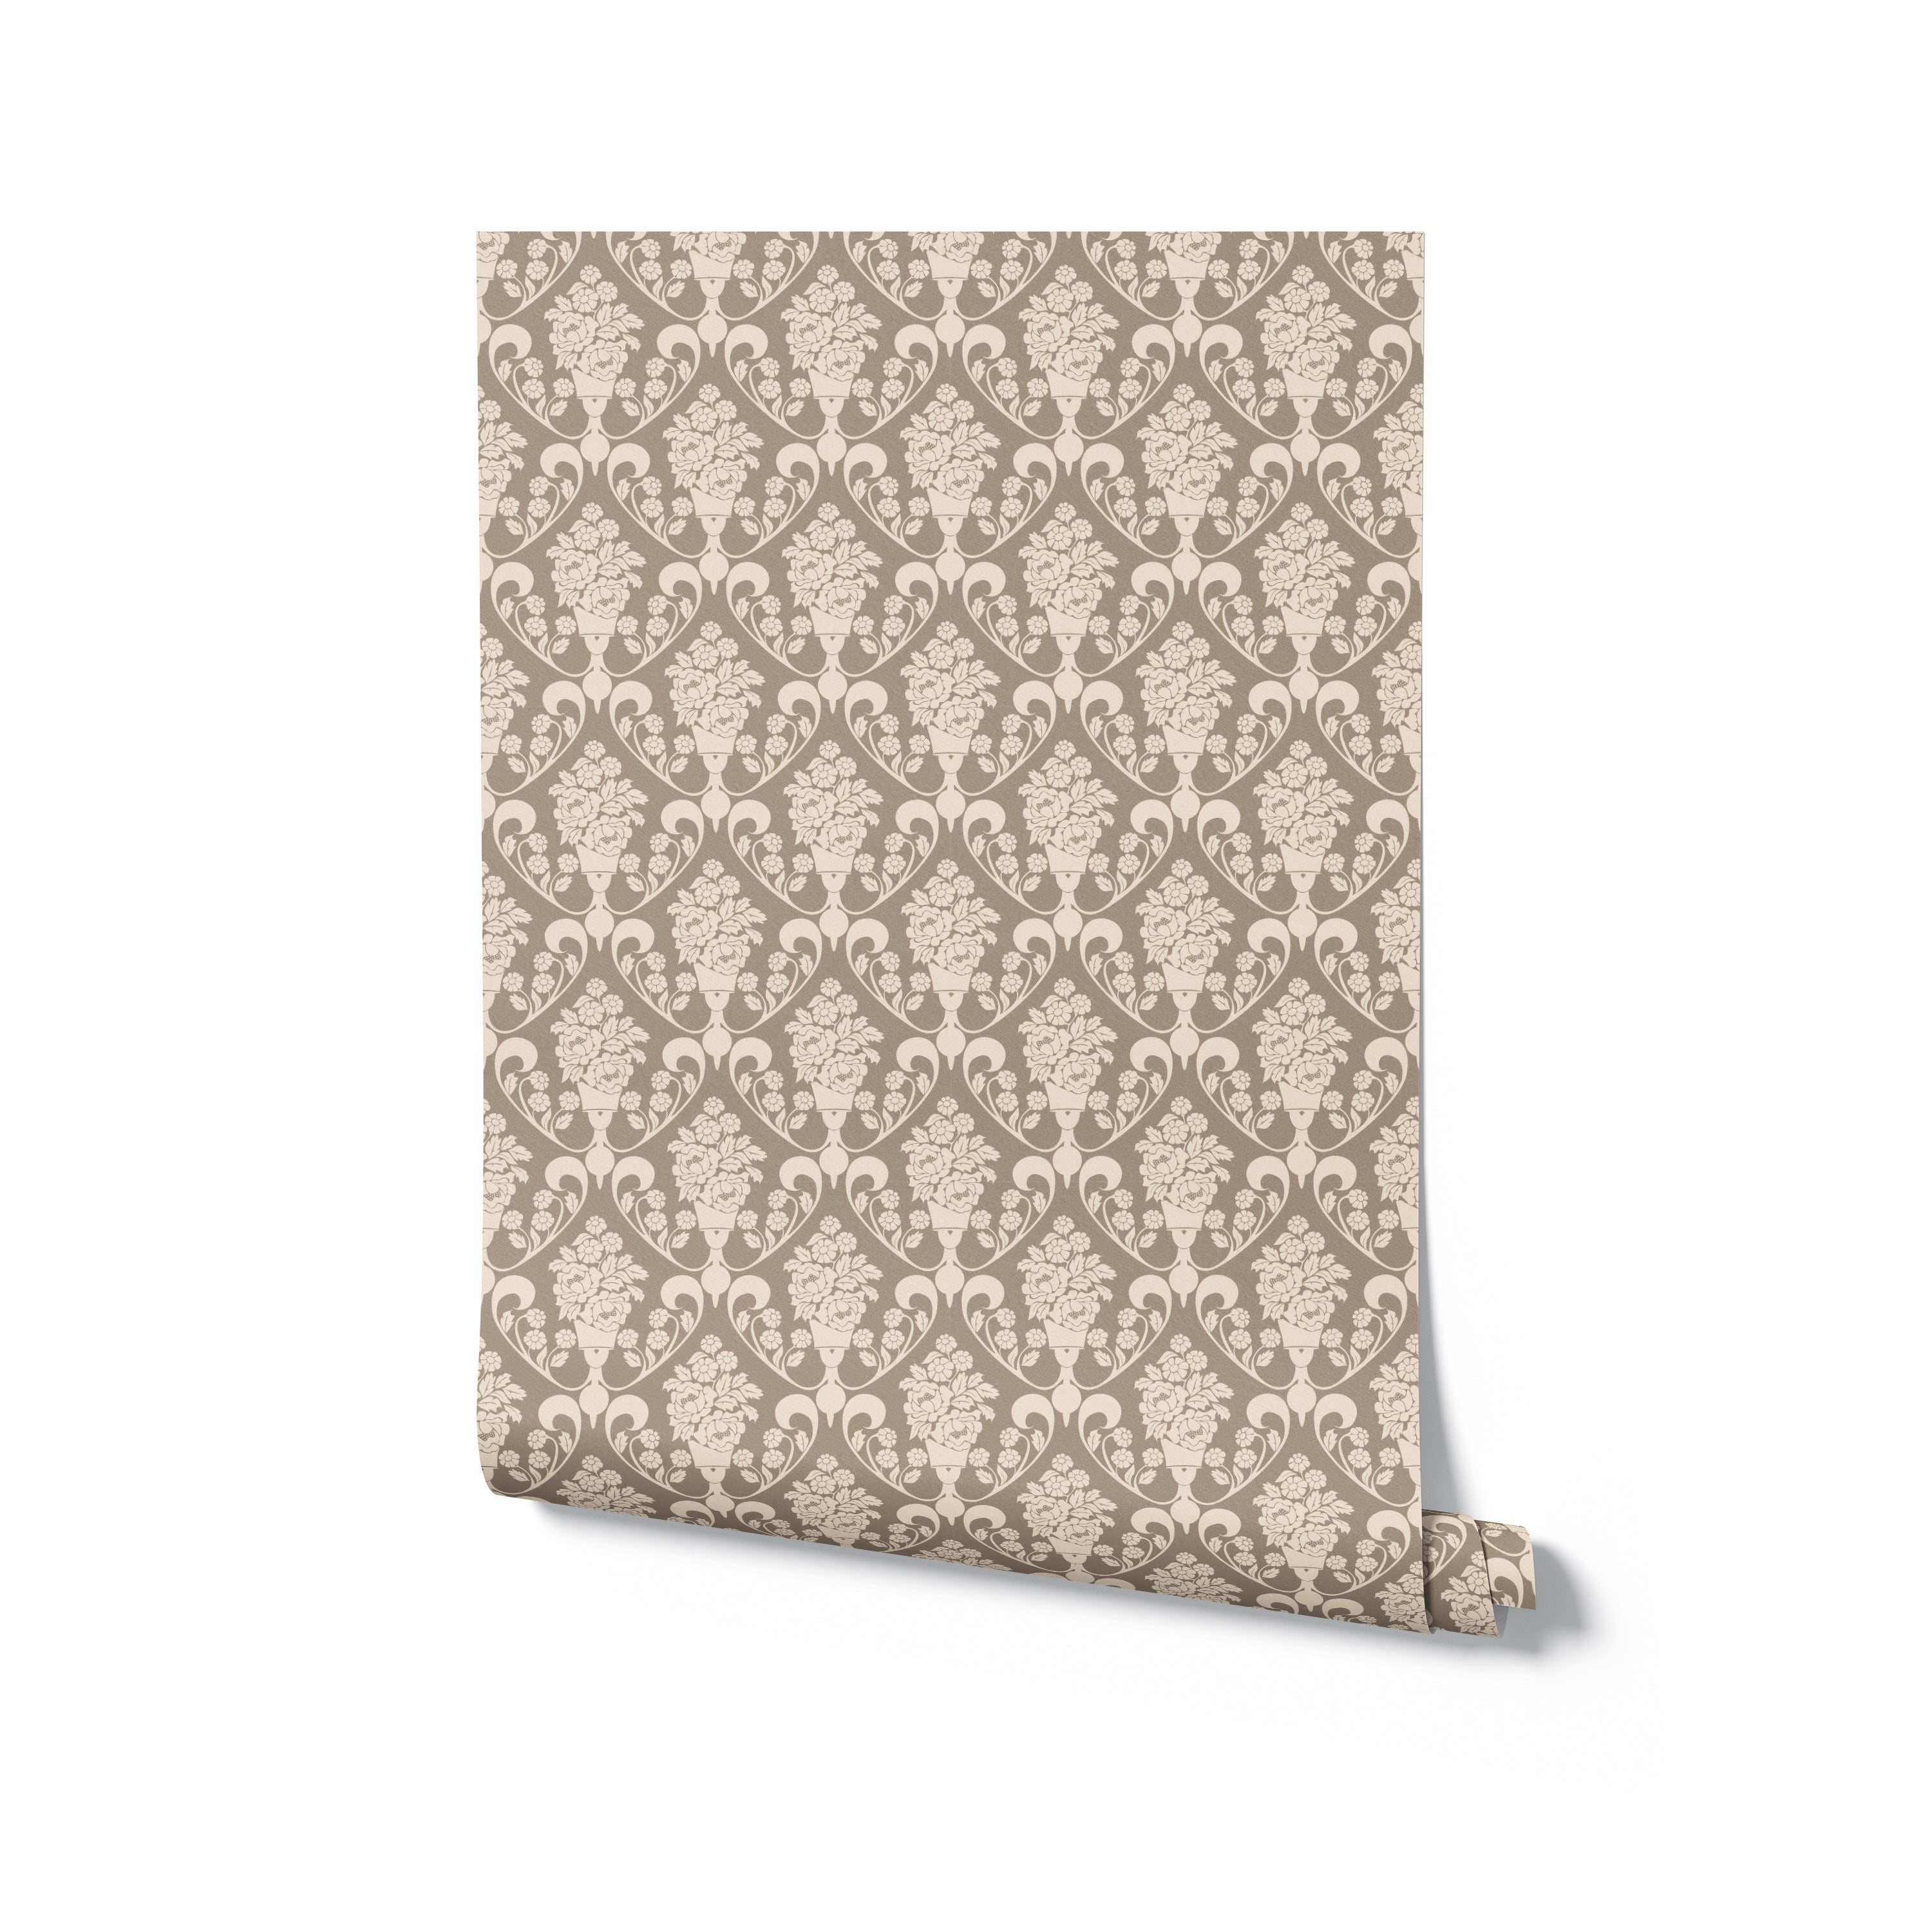 A roll of Victorian Bloom wallpaper, displaying its beautiful beige floral pattern. The intricate design features flower bouquets in vases, ideal for adding a vintage touch to your home decor.